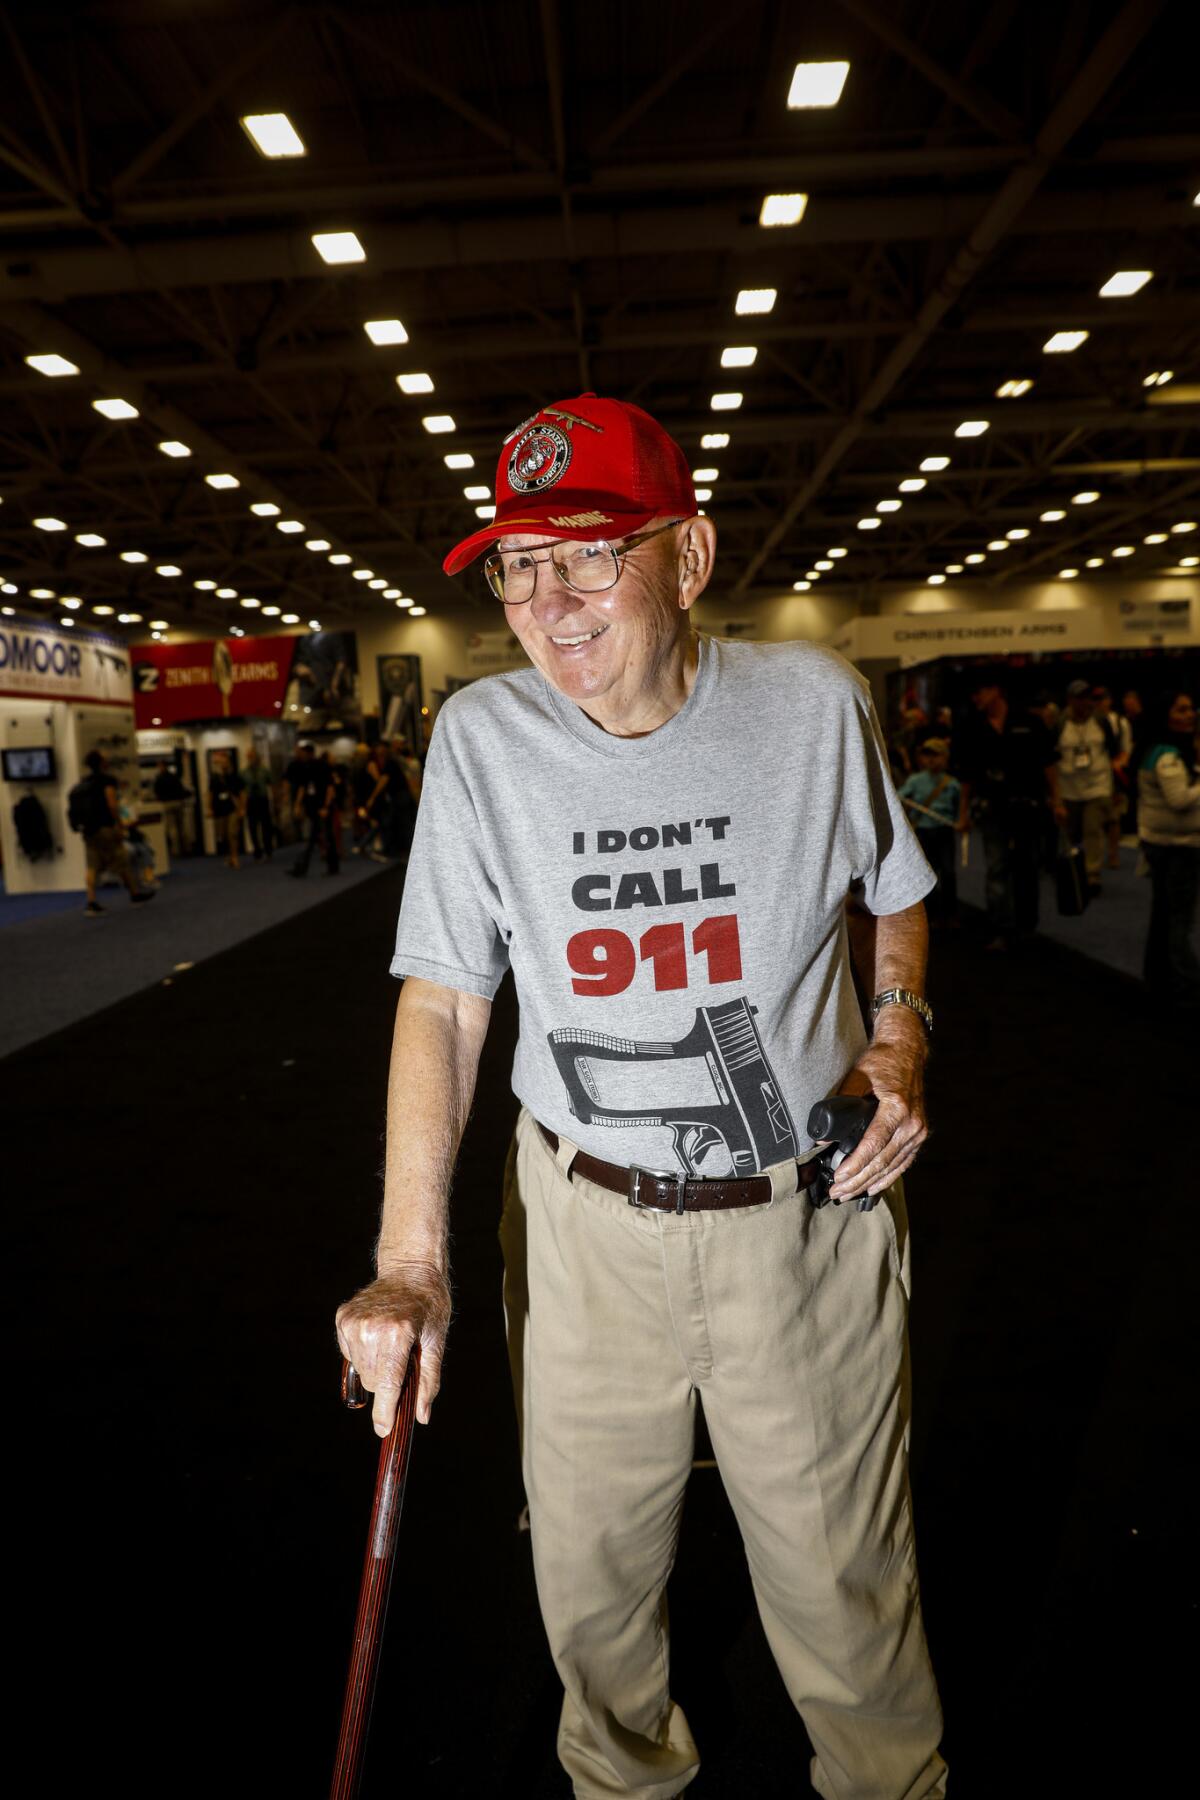 Richard Lavender, 82, a Marine from Parker, Texas, is a proponent of open carry laws and says he always wears his Smith & Wesson Model 642 on his hip when leaving the house.